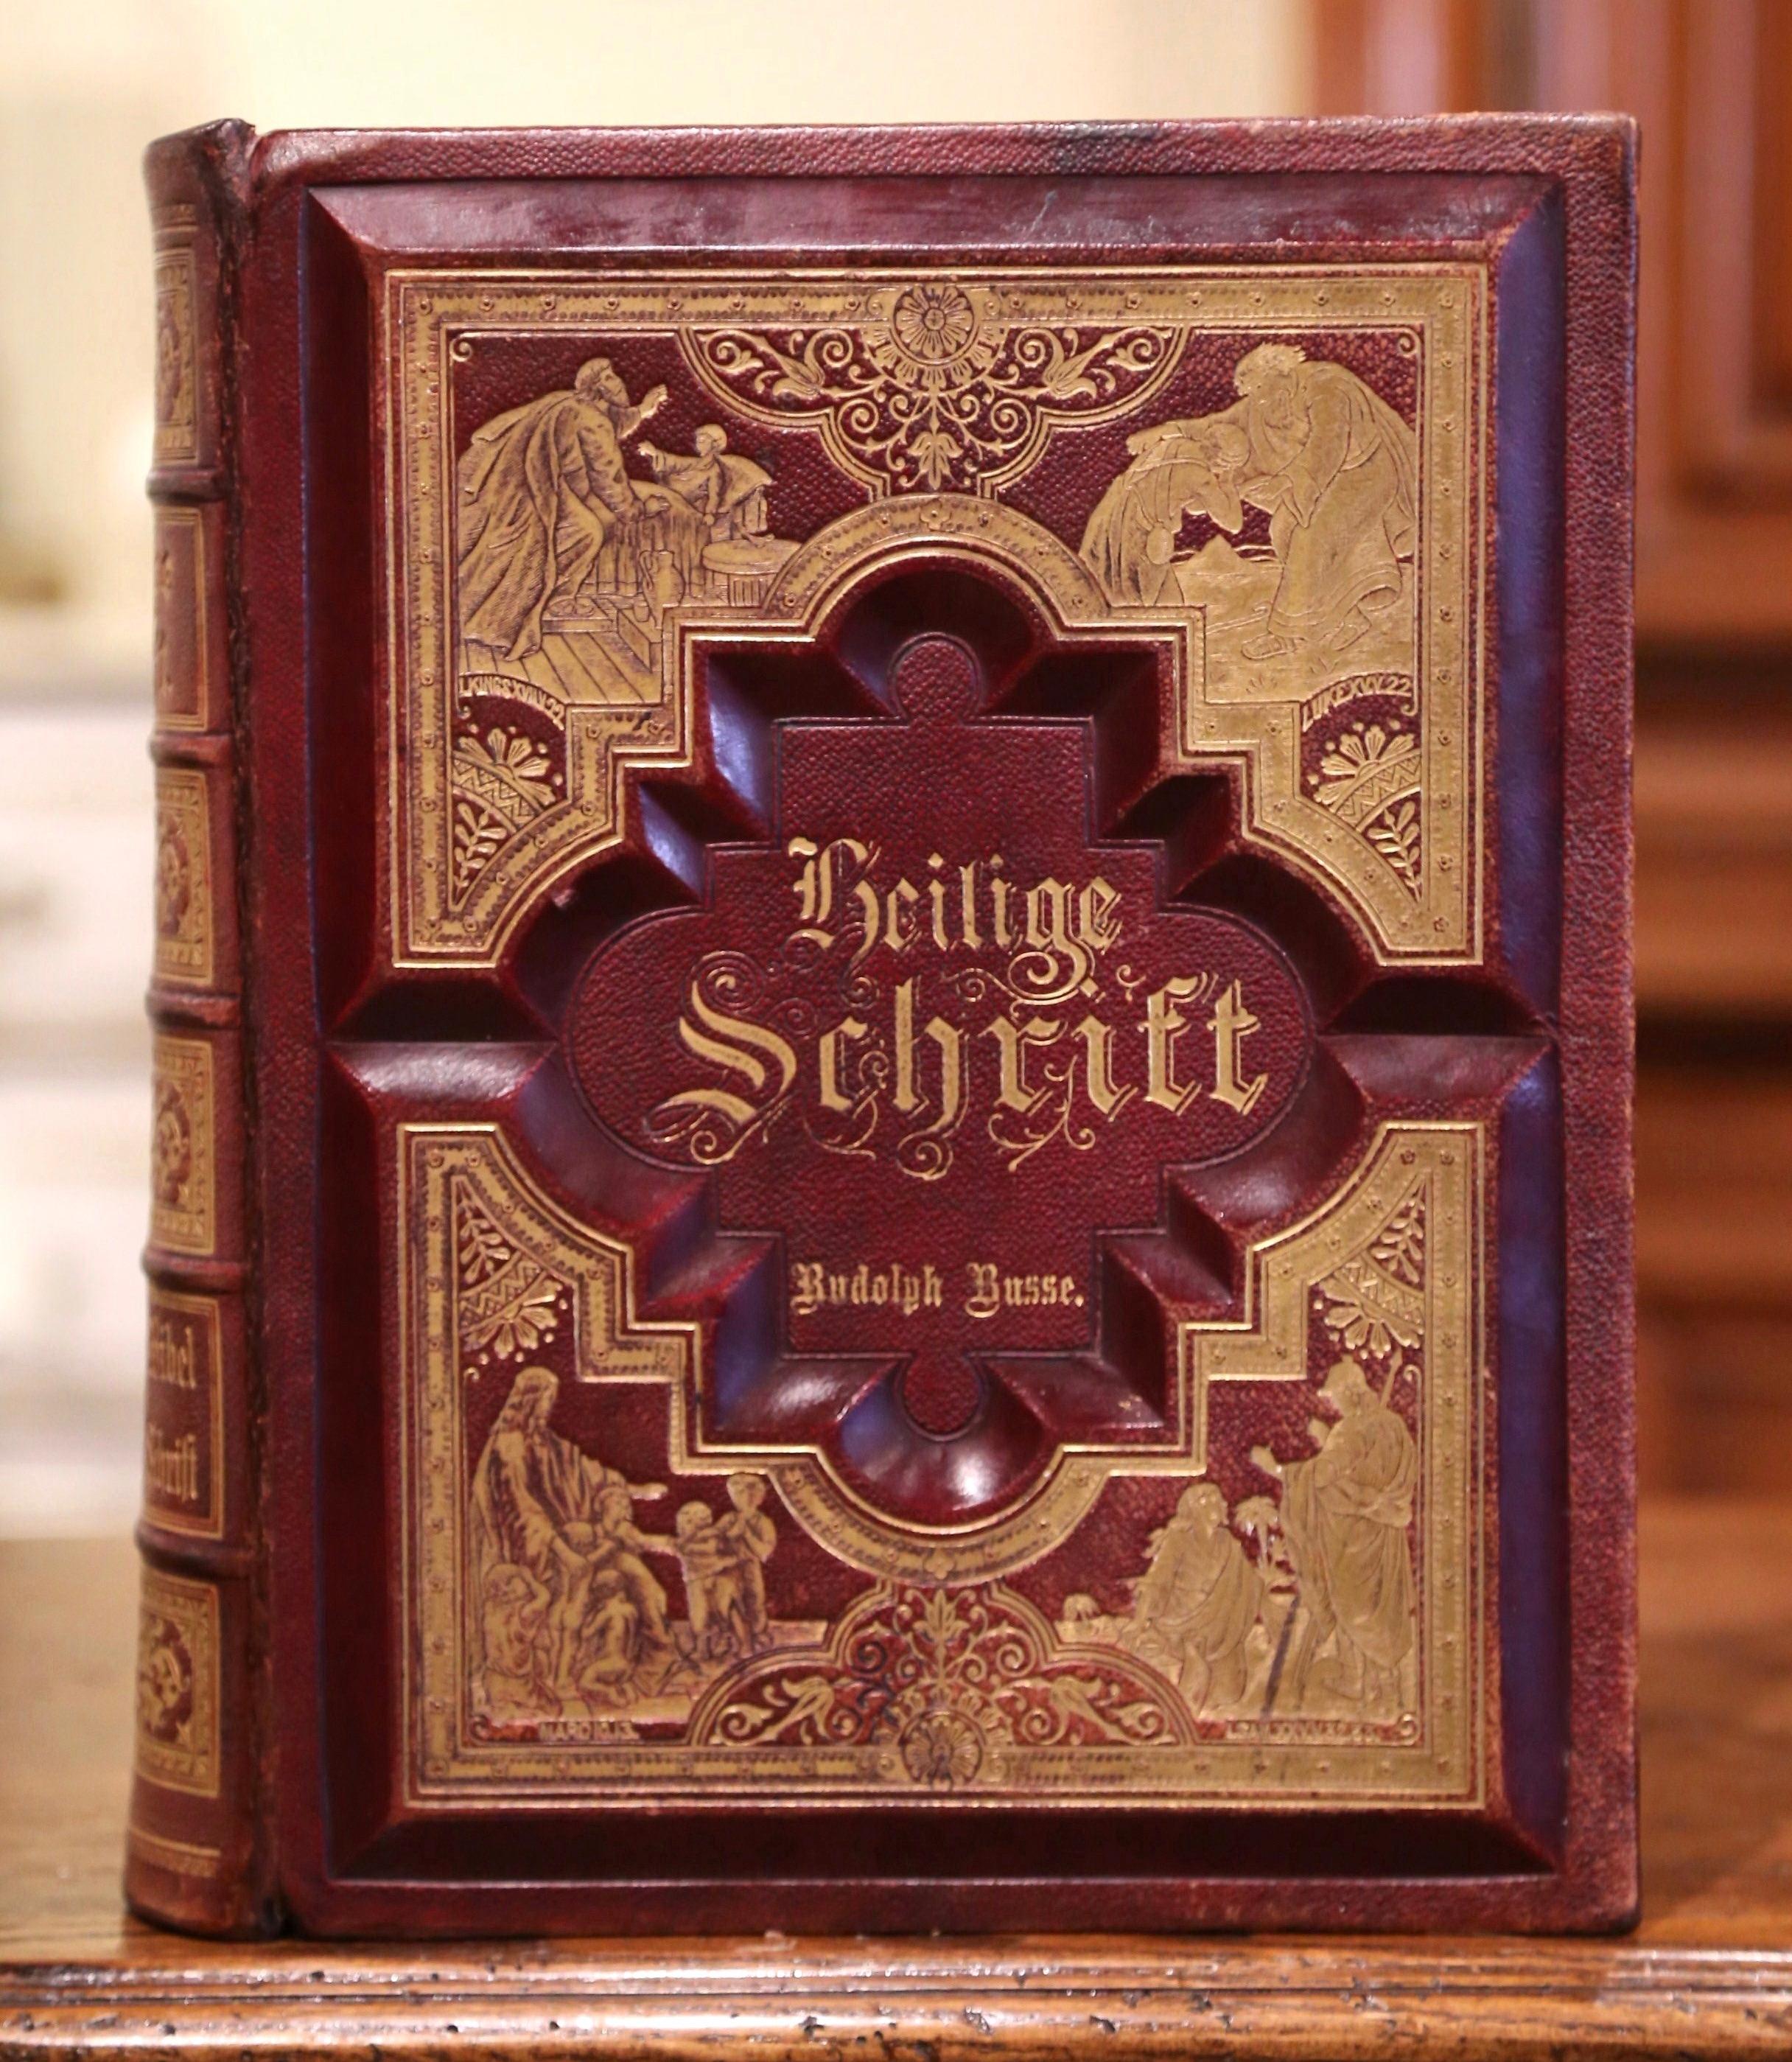 This beautiful antique Holy Bible was printed in Philadelphia, by A. J. Holman & C. Dated 1891 and written in German, the 